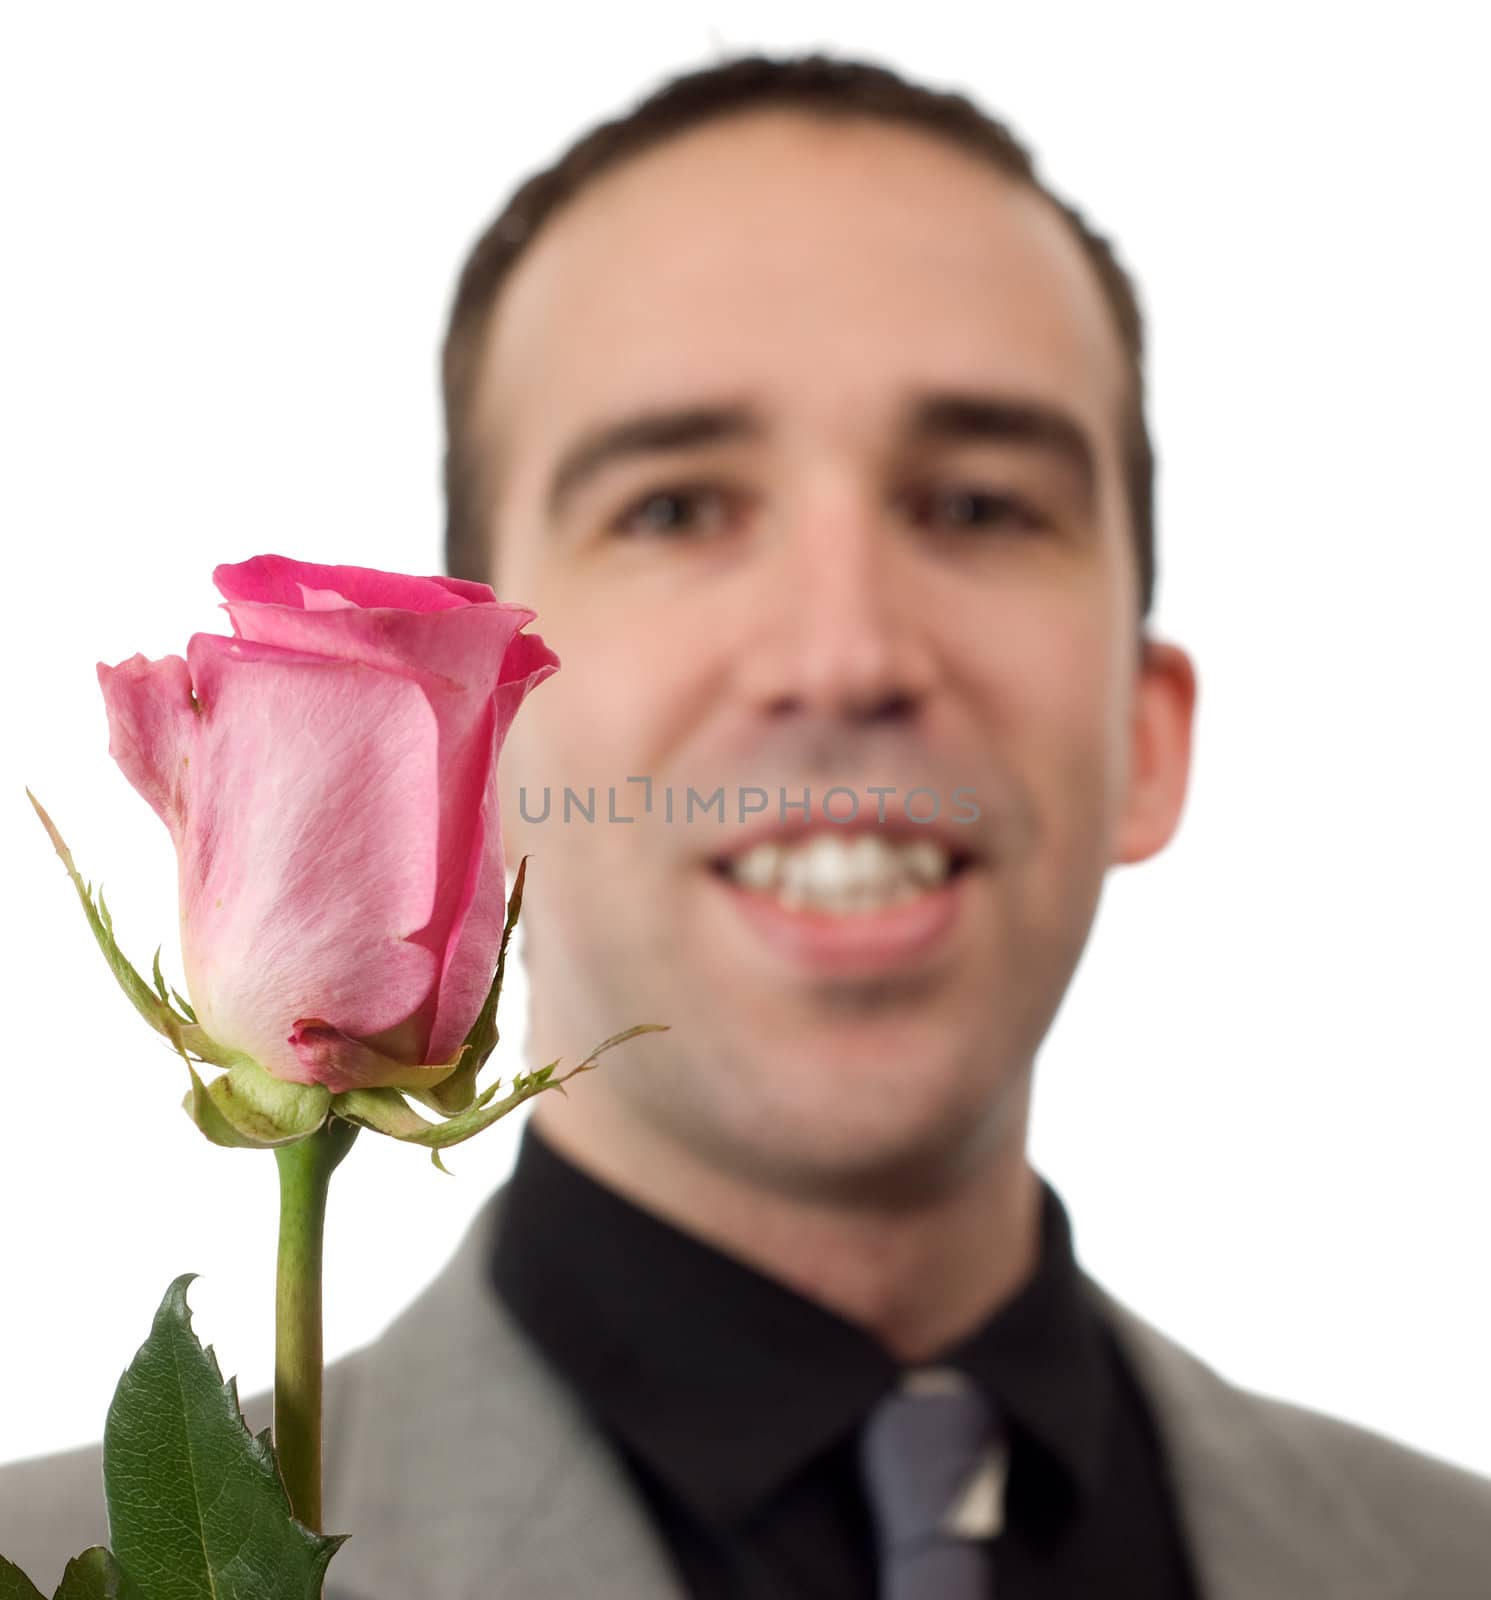 Closeup view of a romantic man and a rose, isolated against a white background